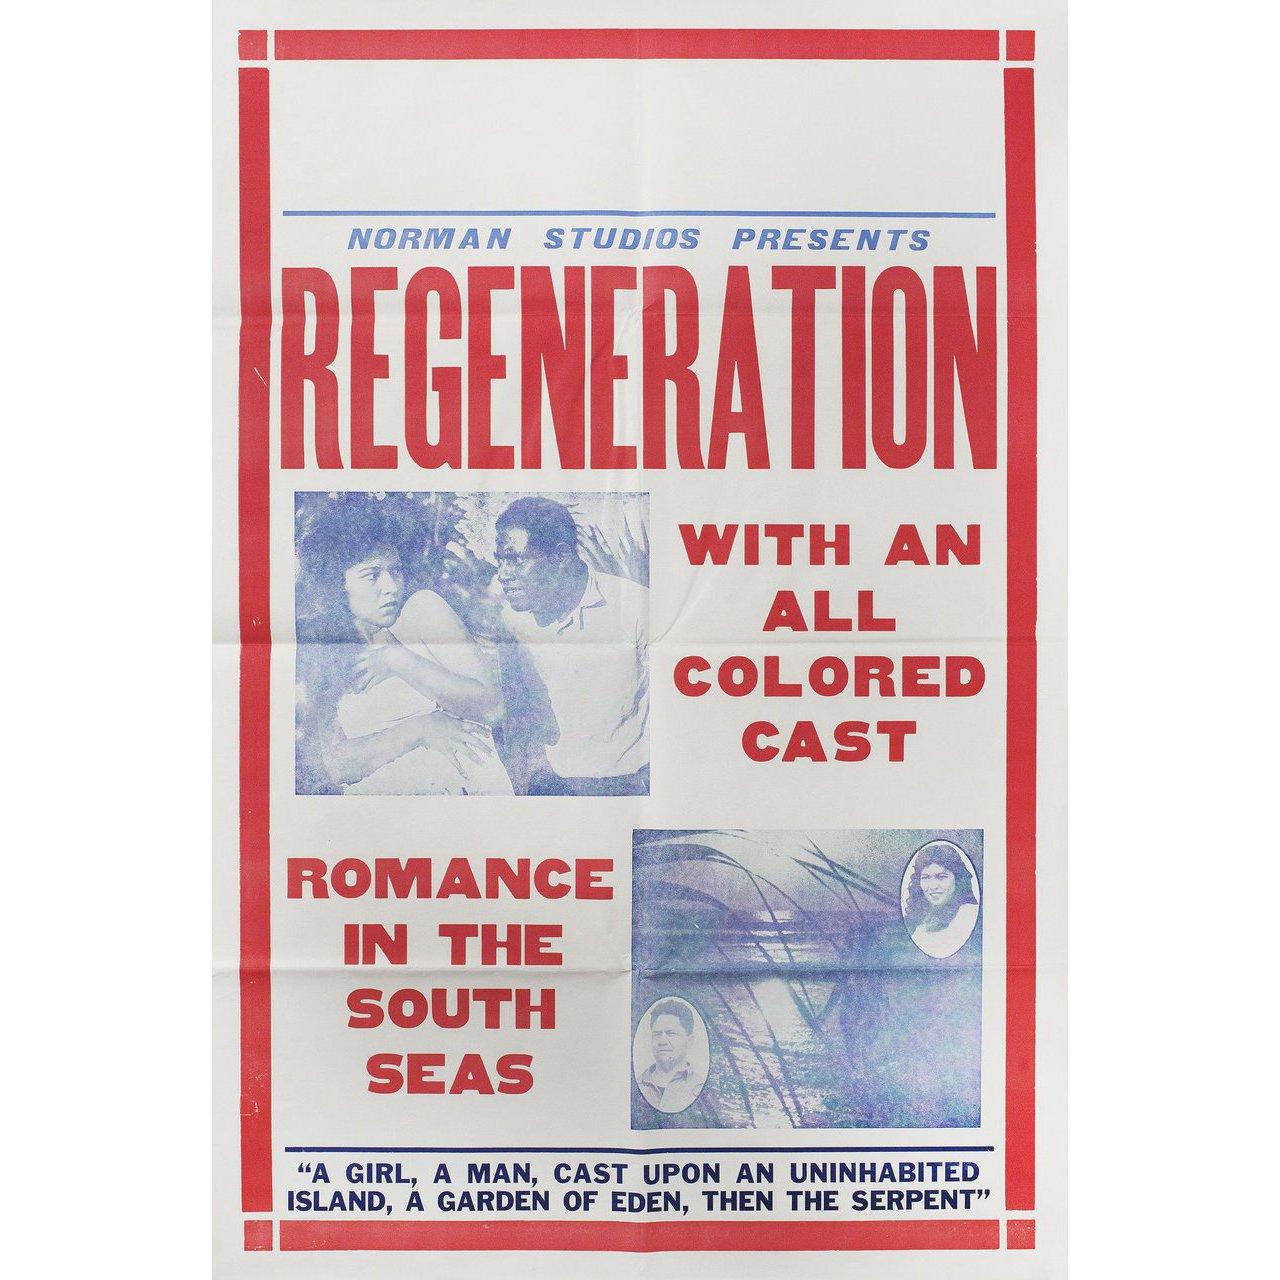 Original 1923 U.S. one sheet poster for the film 'Regeneration' directed by Richard E. Norman with Stella Mayo / M.C. Maxwell / Alfred Norcom / Charlie Gaines. Fine condition, folded. Many original posters were issued folded or were subsequently